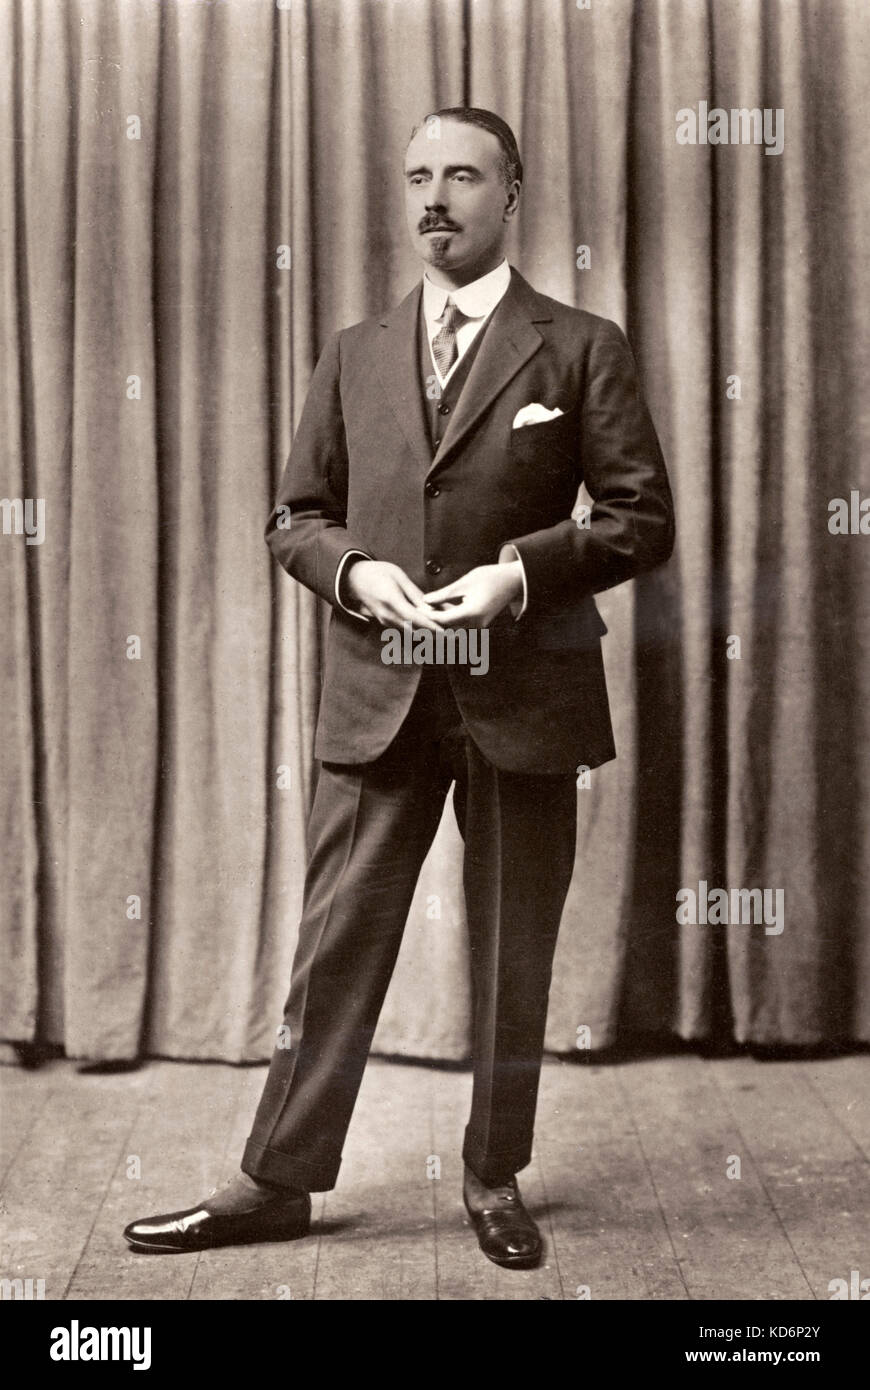 Sir Thomas Beecham - portrait of the British conductor. 29 April 1879 - 8 March 1961. Stock Photo